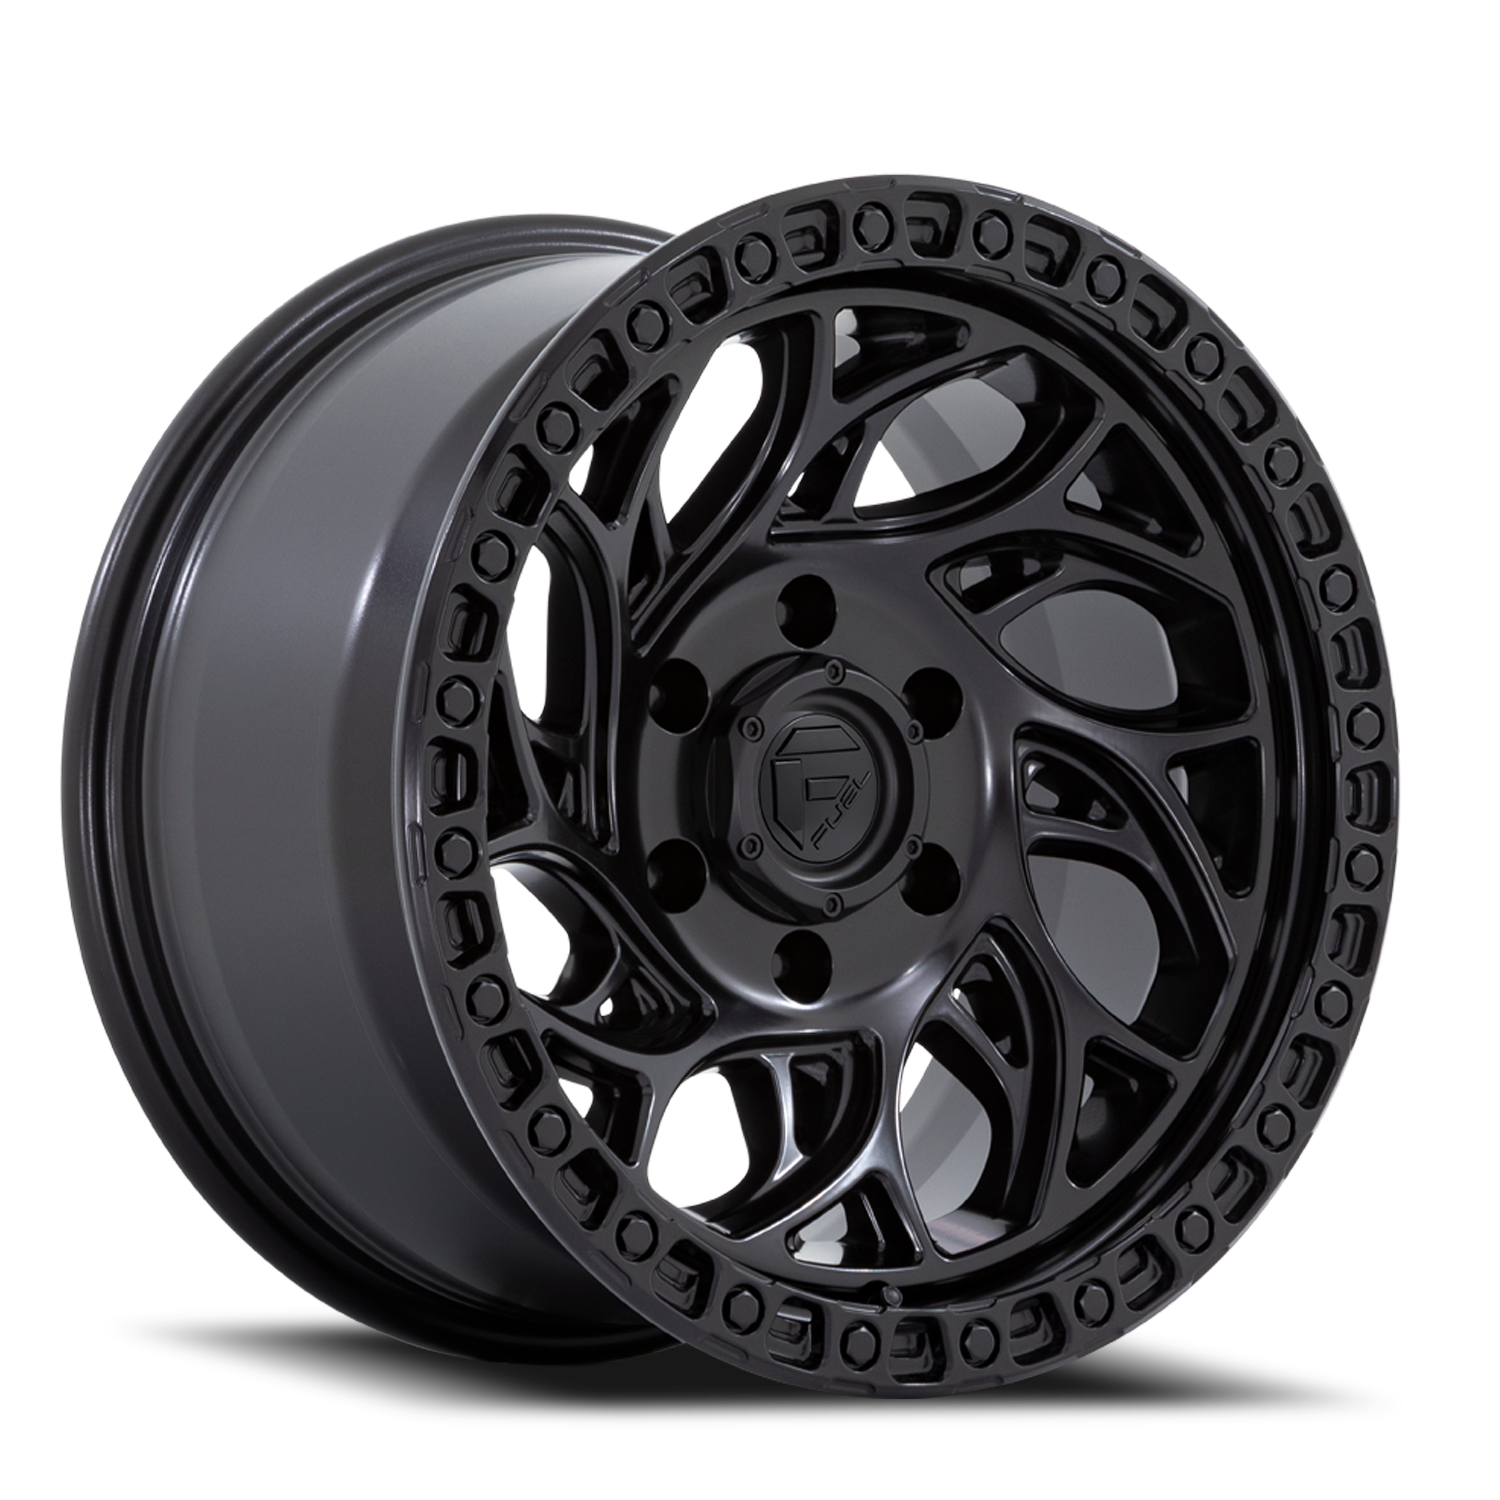 Aluminum Wheels 17X9 Runner OR D852 5 On 139.7 Blackout 78.1 Bore -12 Offset Fuel Off Road Wheels